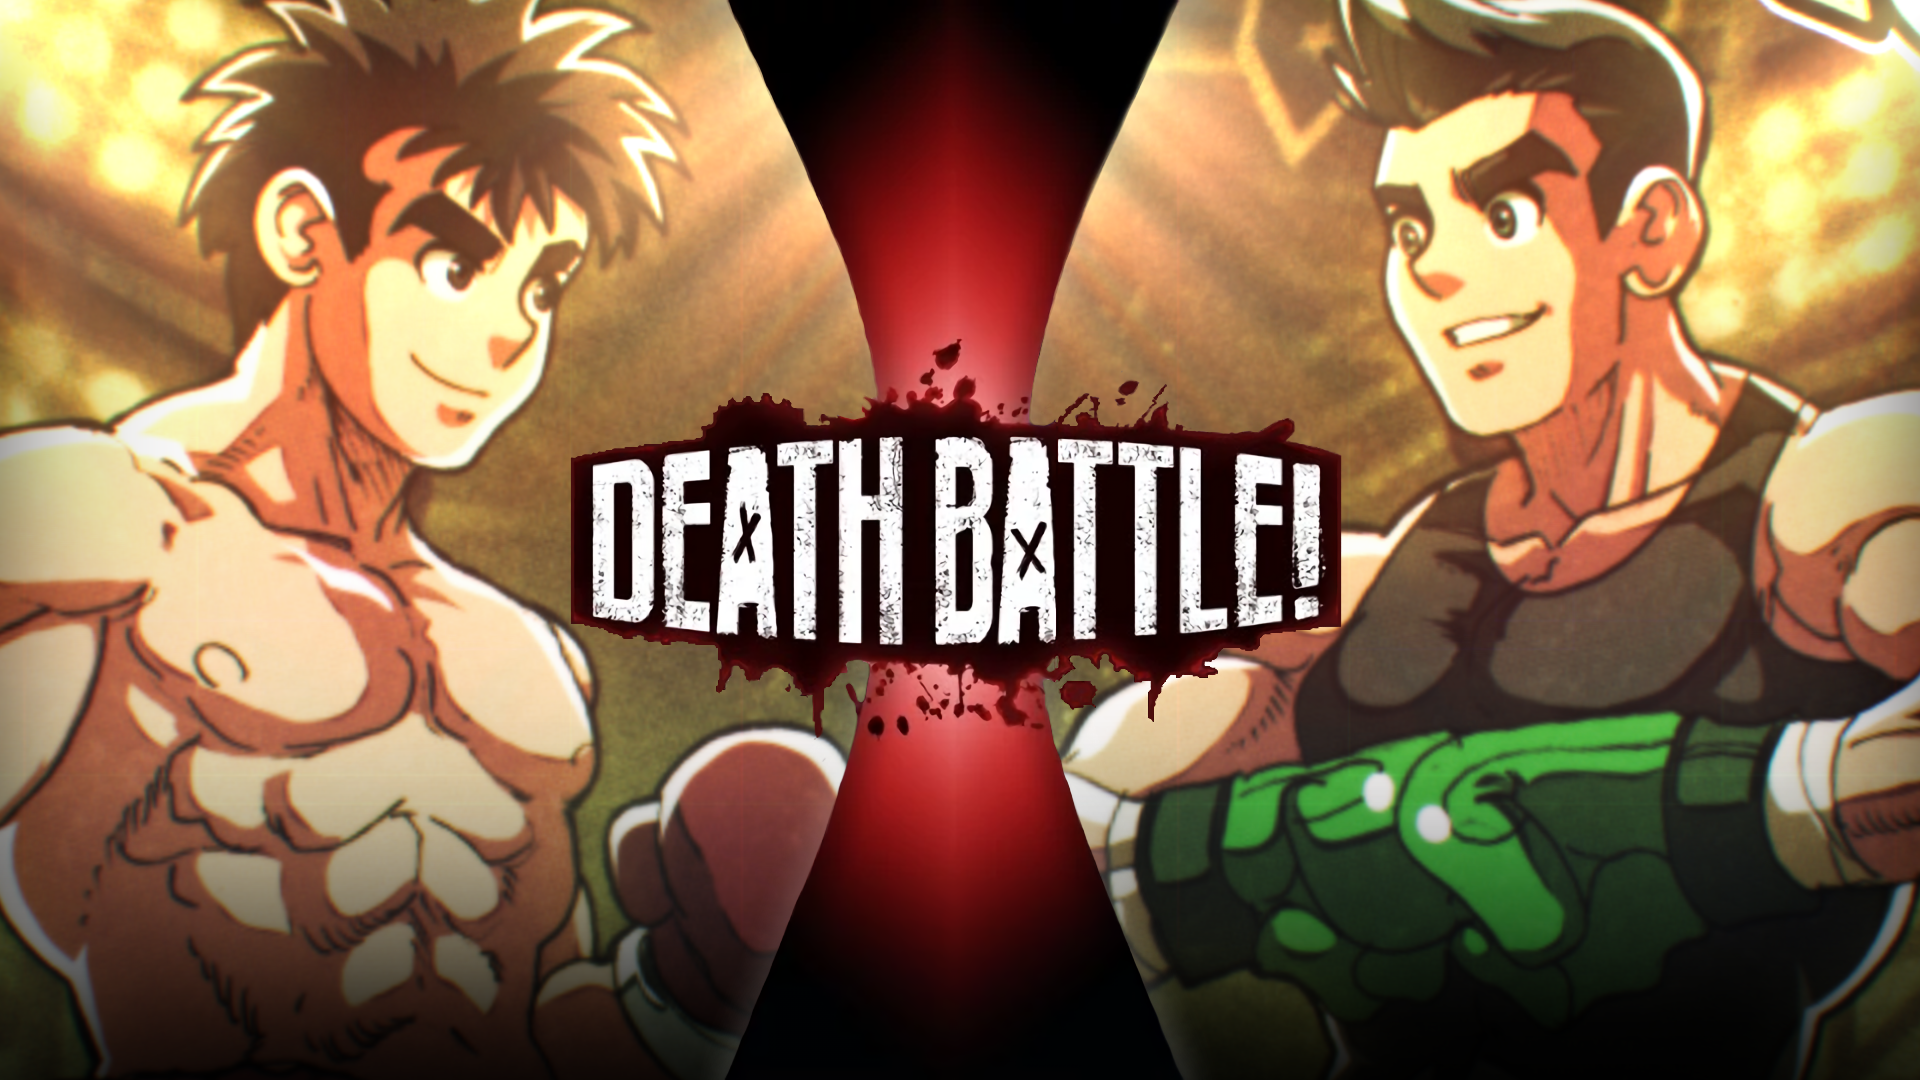 Little Mac VS Ippo Makunouchi (Punch Out VS Hajime no Ippo) Thumbnail. Any  Feedback is welcomed. : r/DeathBattleMatchups